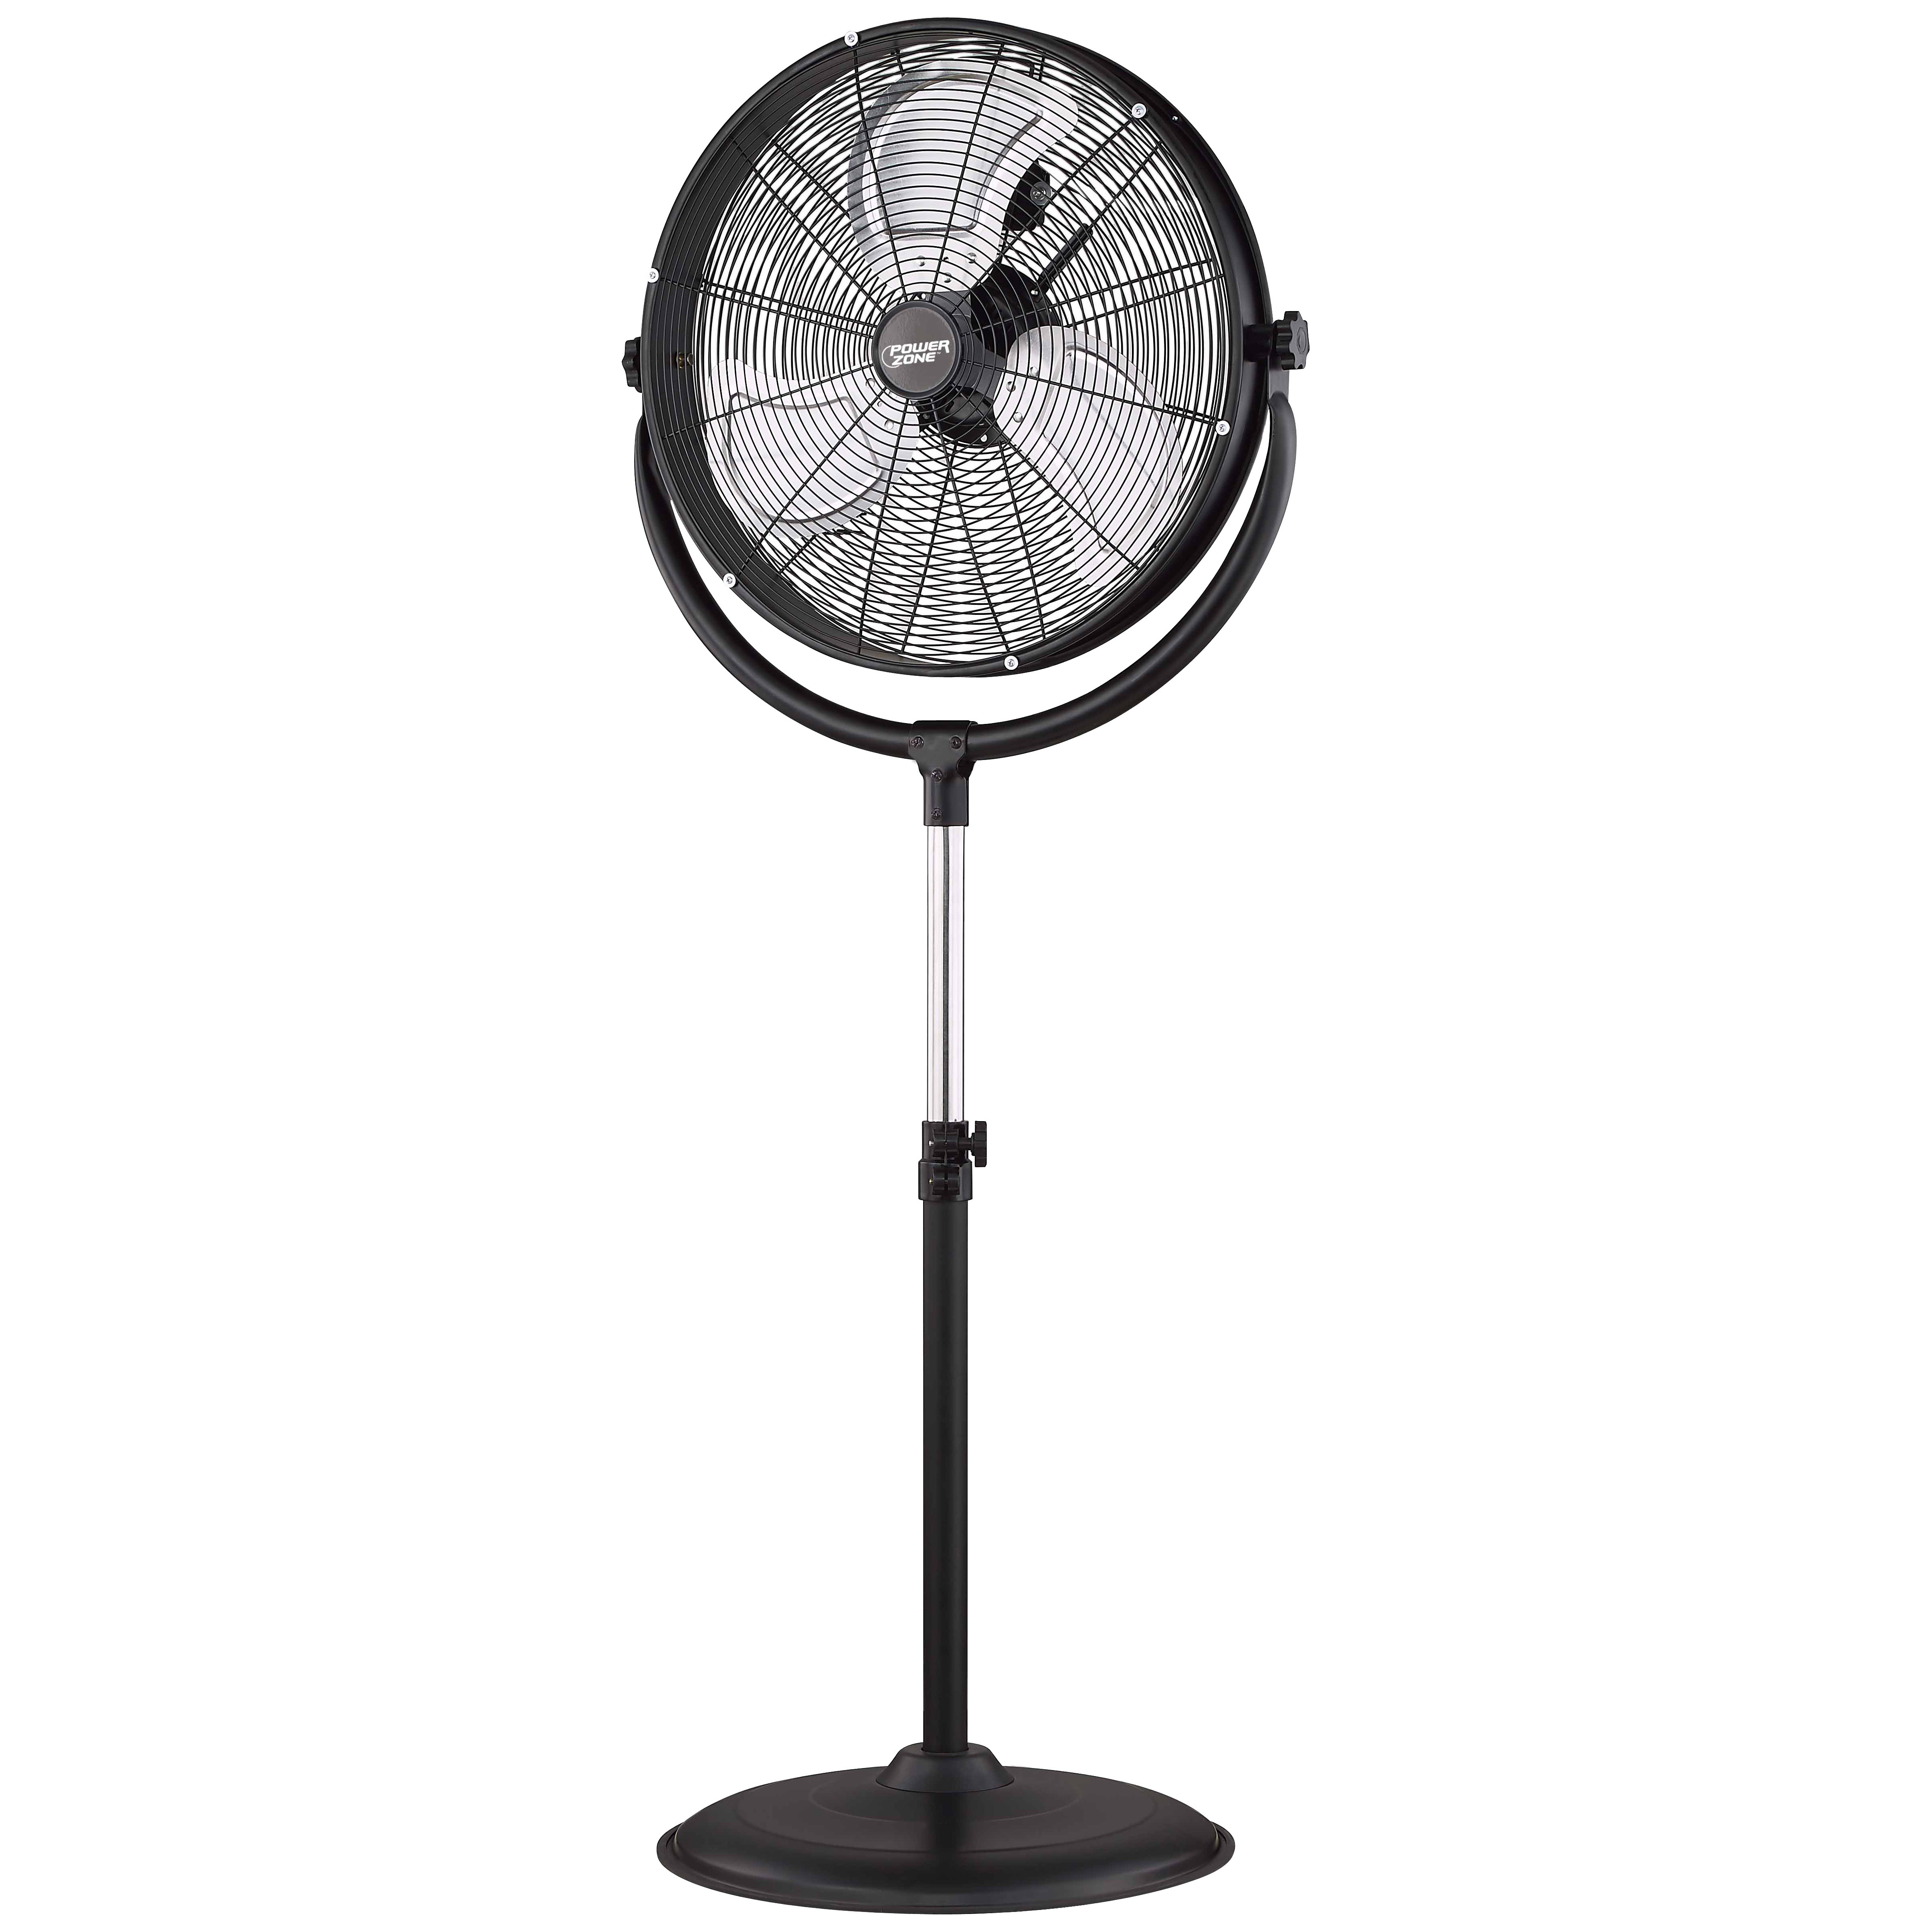 FES50-T5 High-Velocity Pedestal Stand Fan, 120 V, 1.25 A, 20 in Dia Blade, 3-Blade, Metal Blade, Black